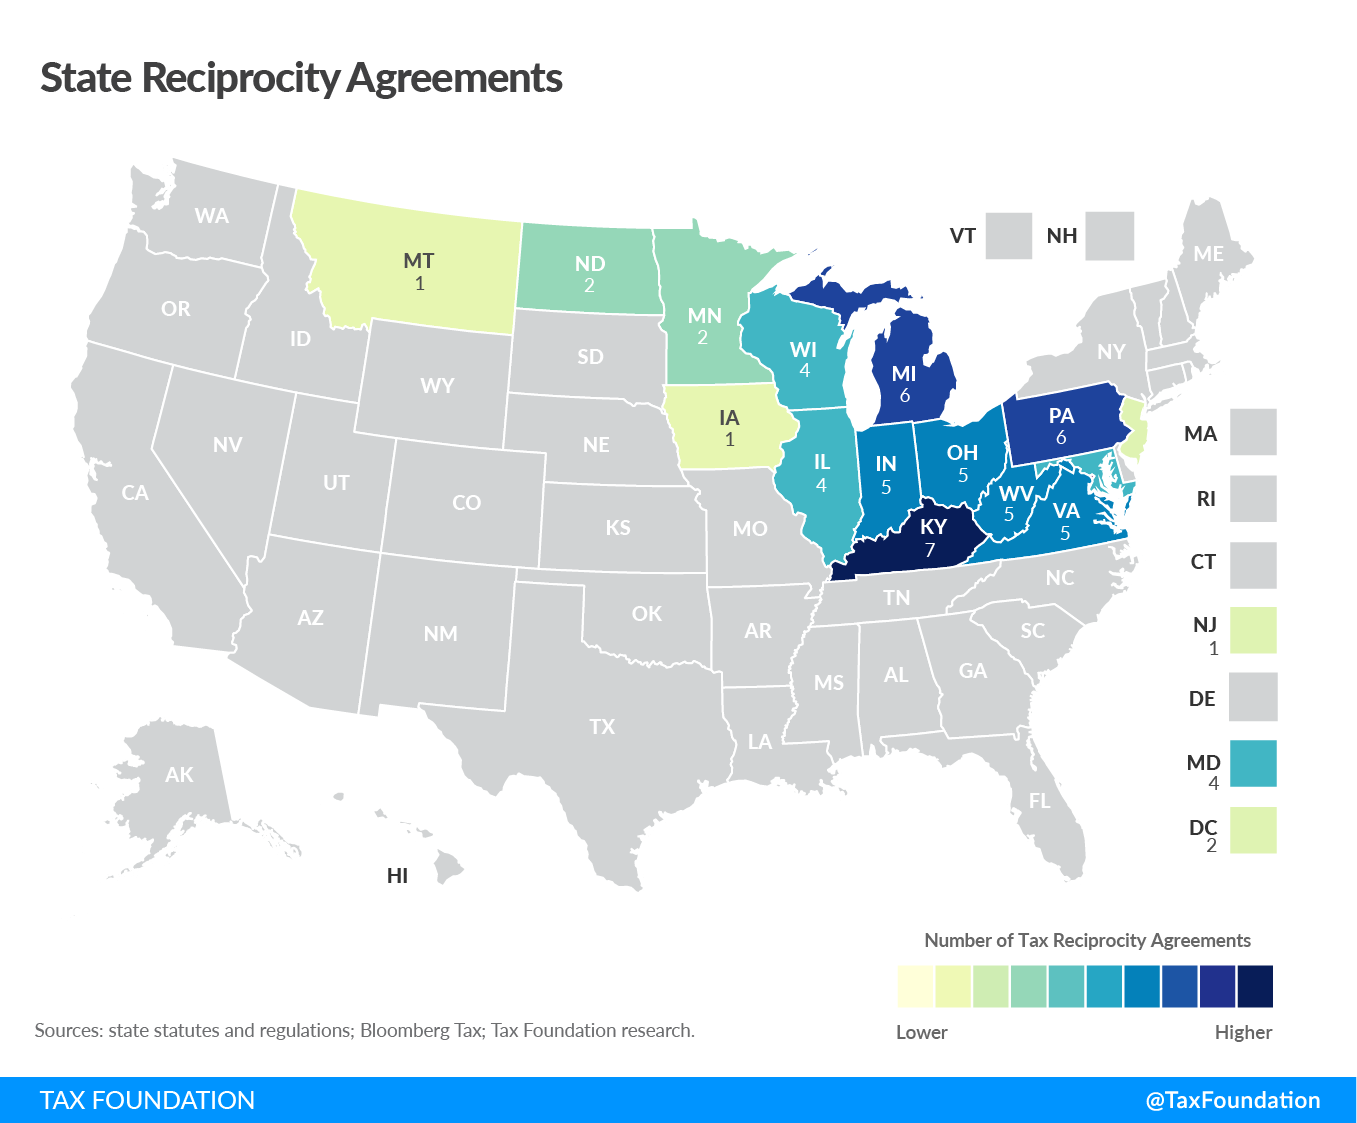 State reciprocity agreements including state income tax reciprocity agreements